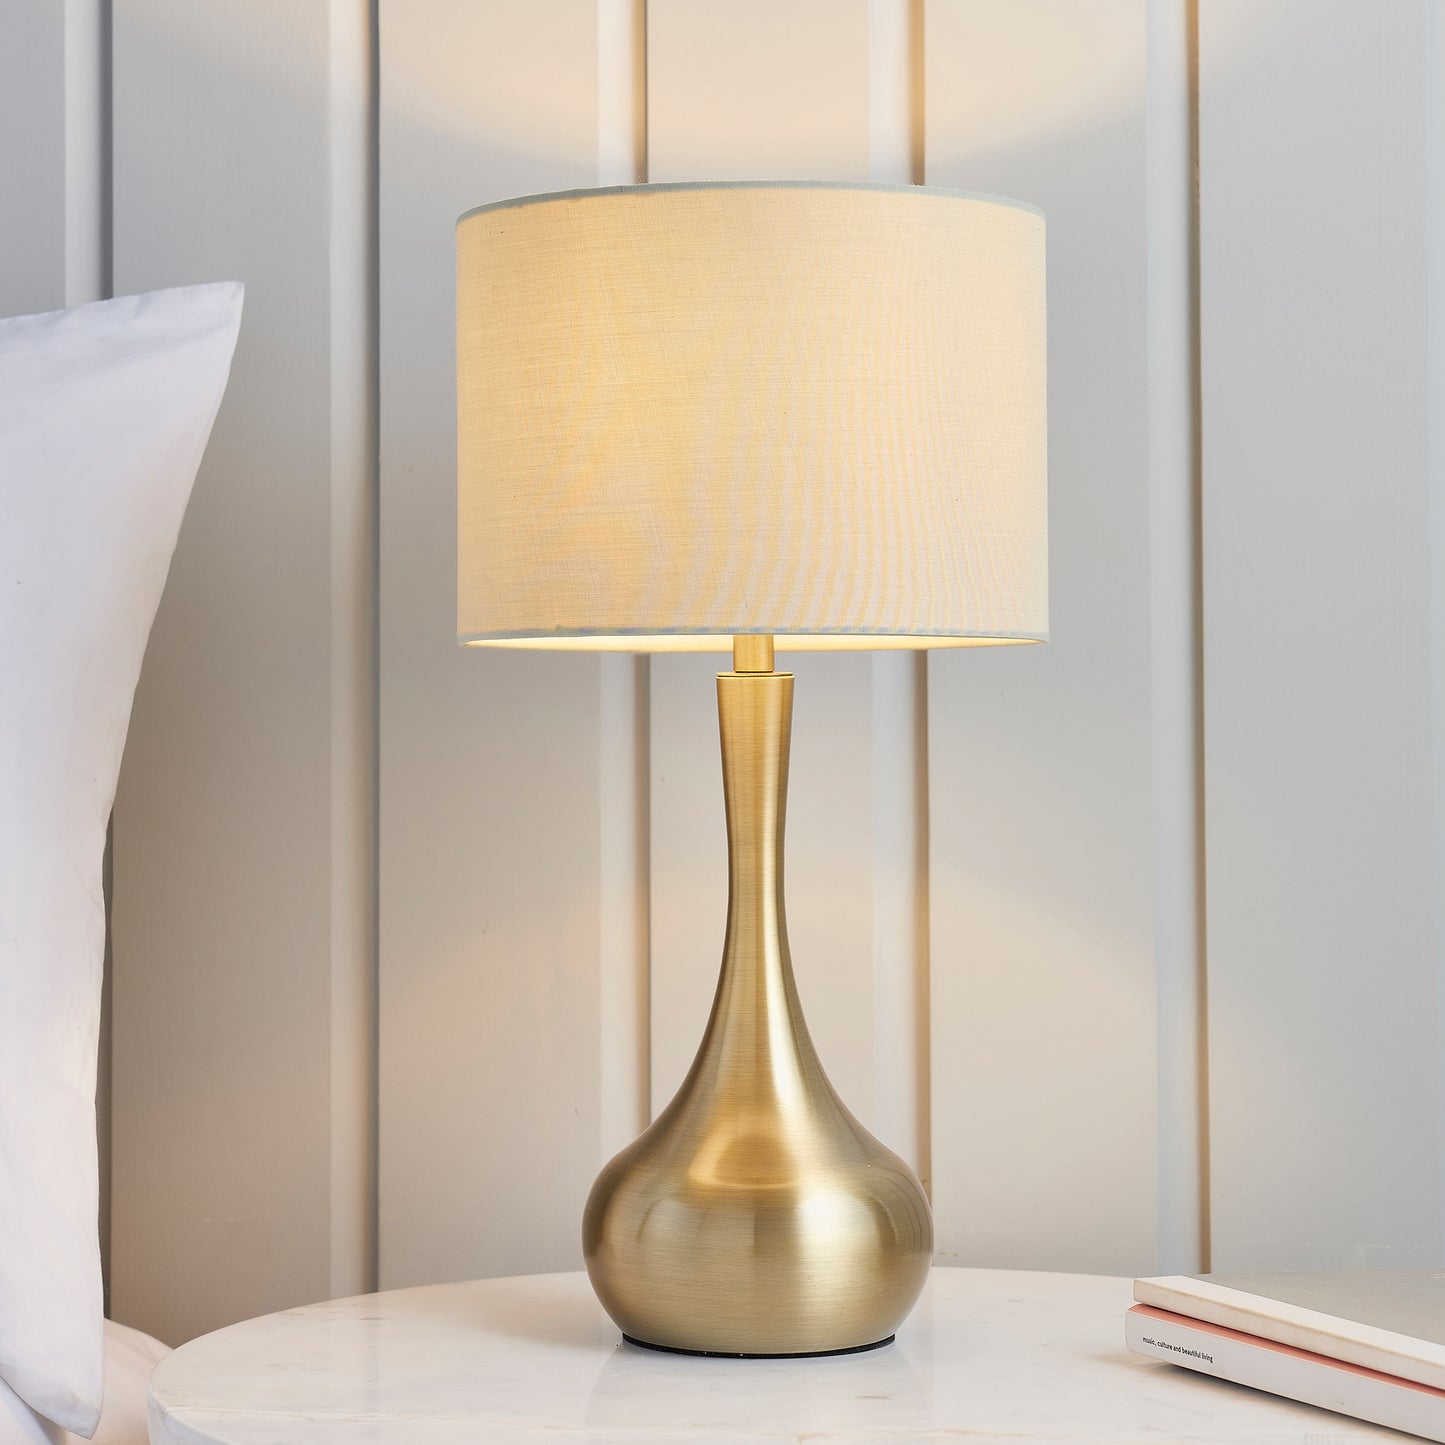 A brass and taupe Piccadilly table lamp from Kikiathome.co.uk enhances the interior decor of a white bed.